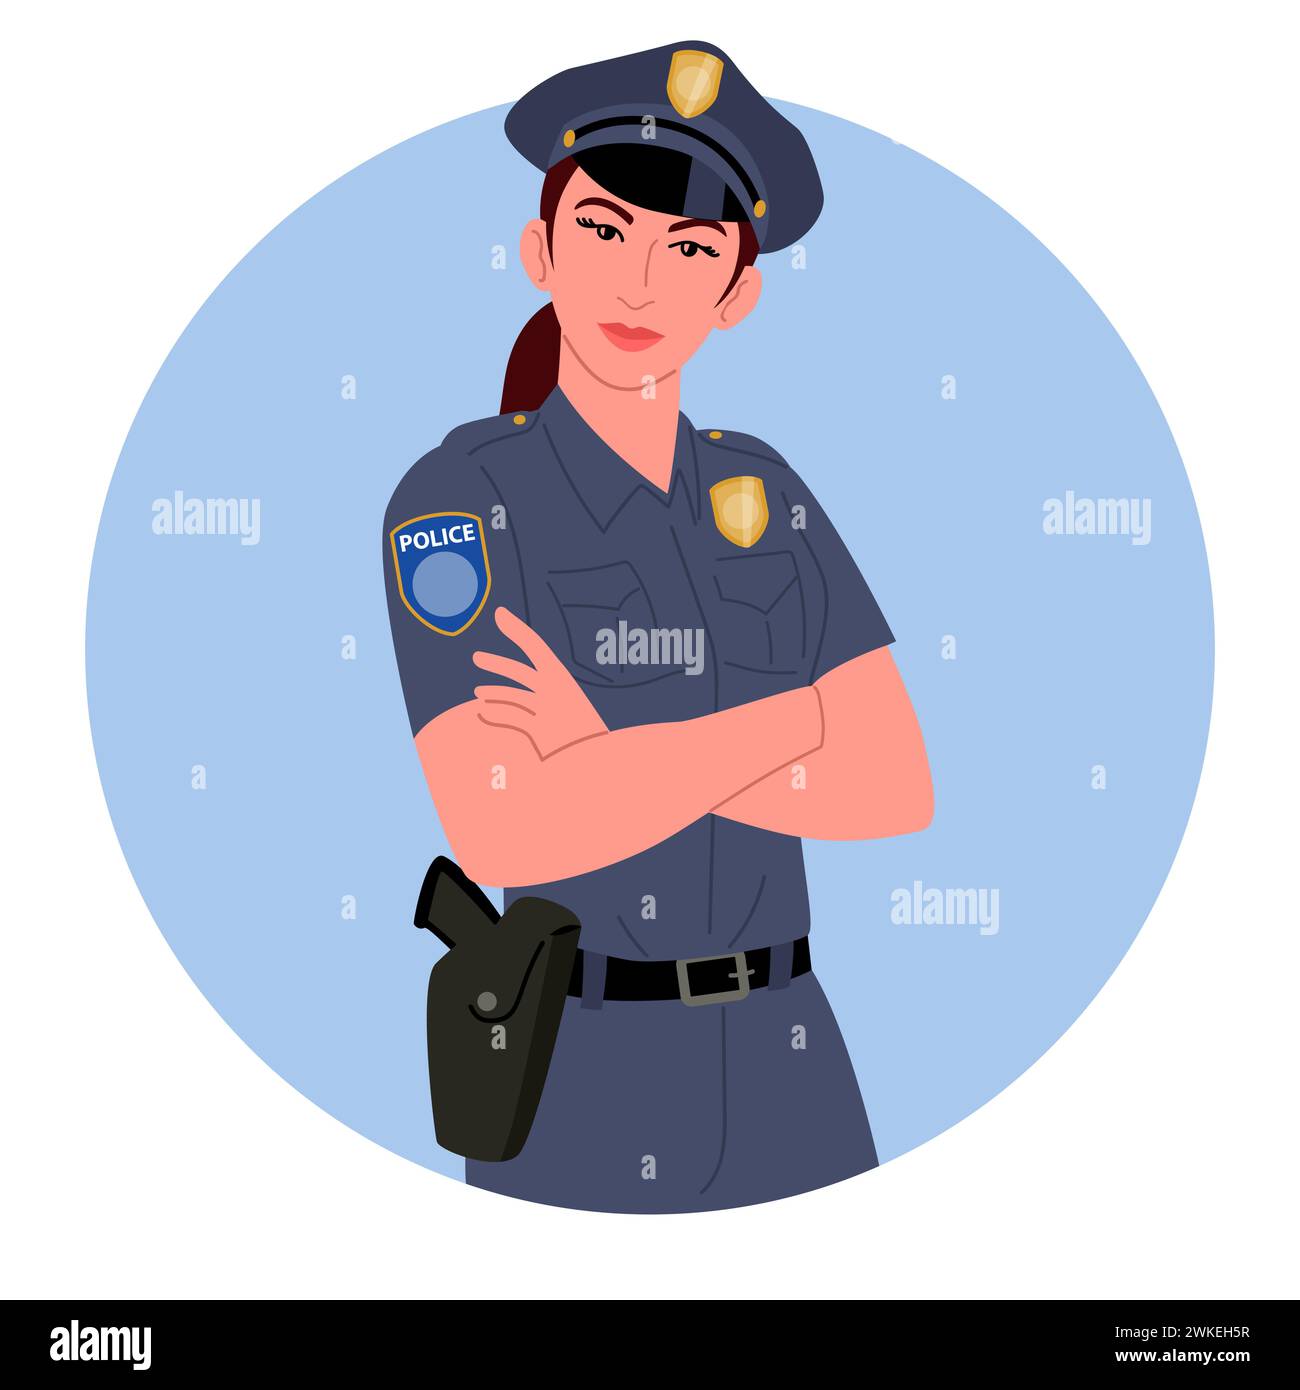 Clip art featuring a police woman with folded hands, perfect for police department materials, security presentations, and community safety campaigns Stock Vector